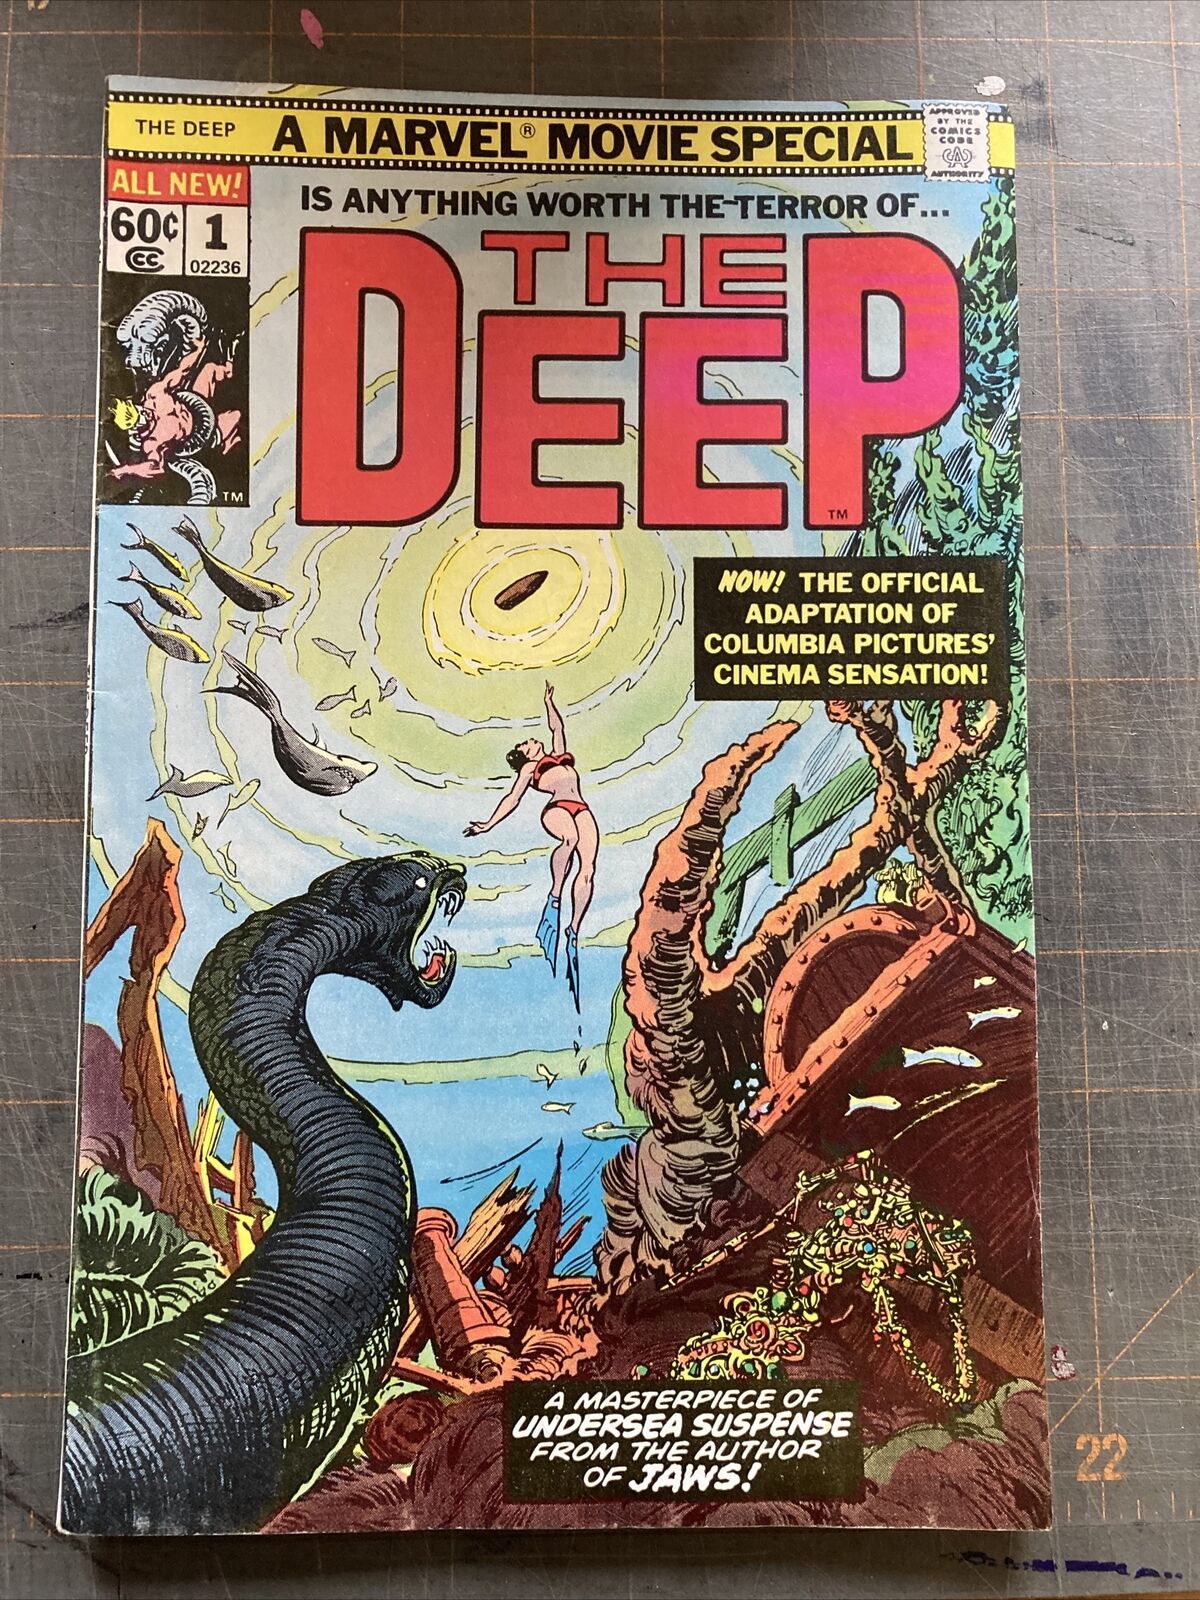 1977 Marvel Comics Marvel Movie Special The Deep #1 Comic Book FN